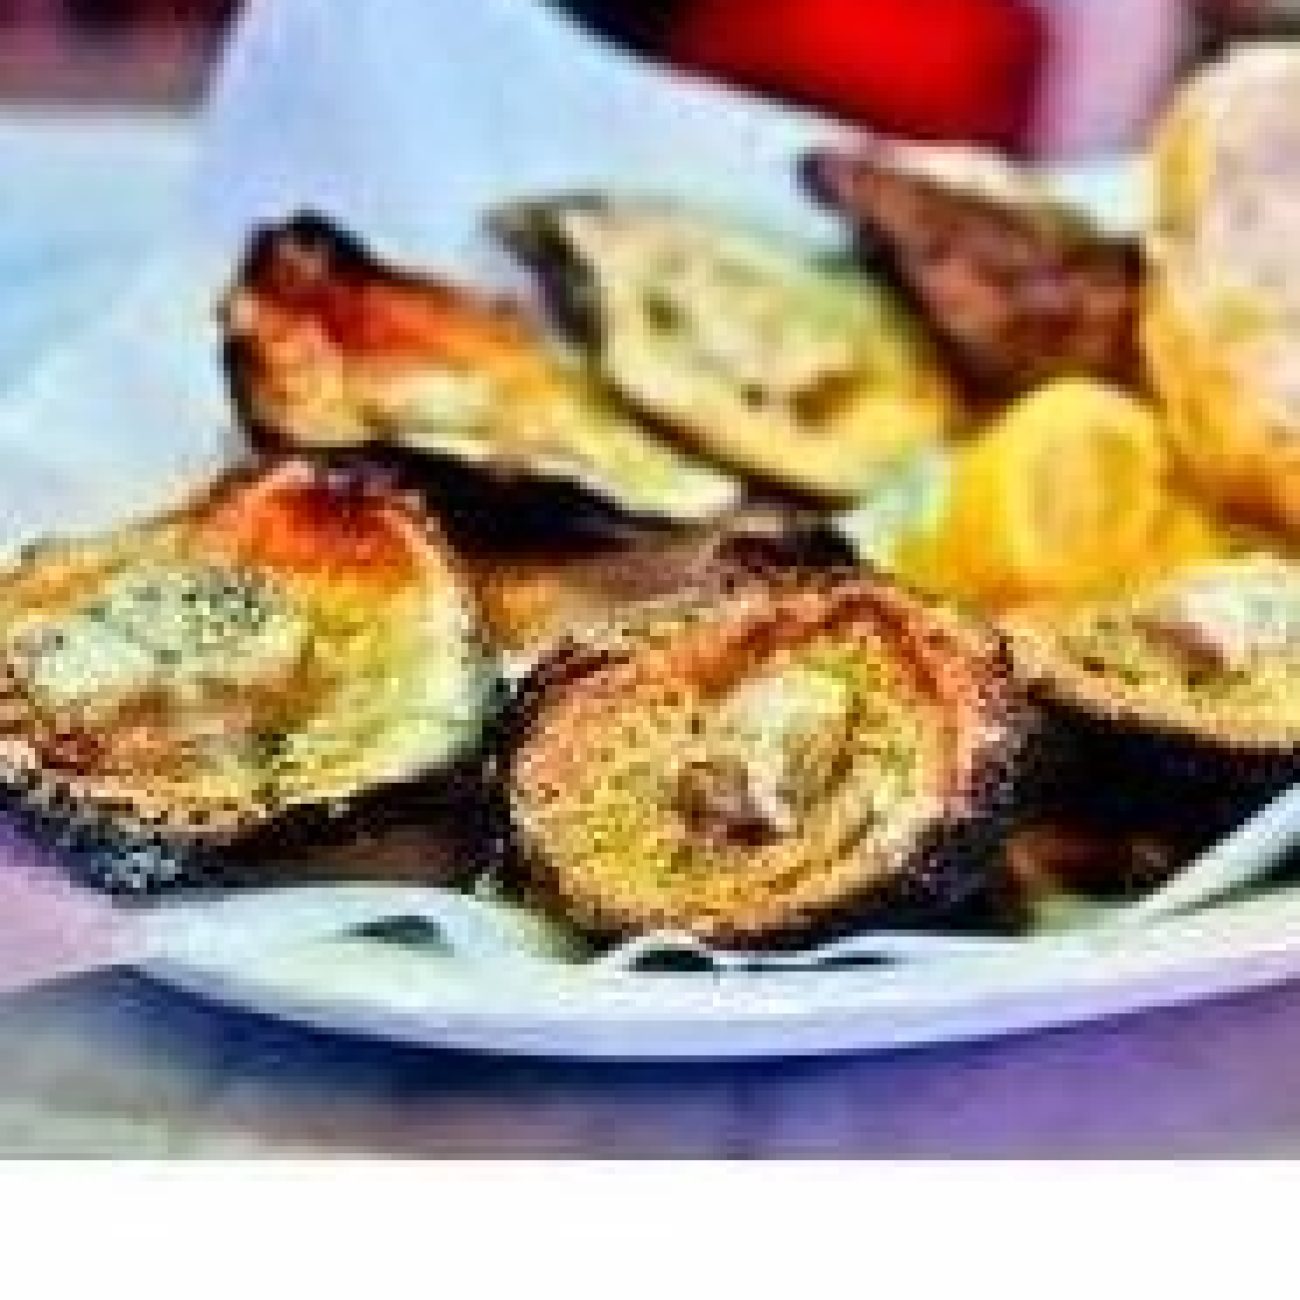 Chargrilled Oysters Acme Oyster House